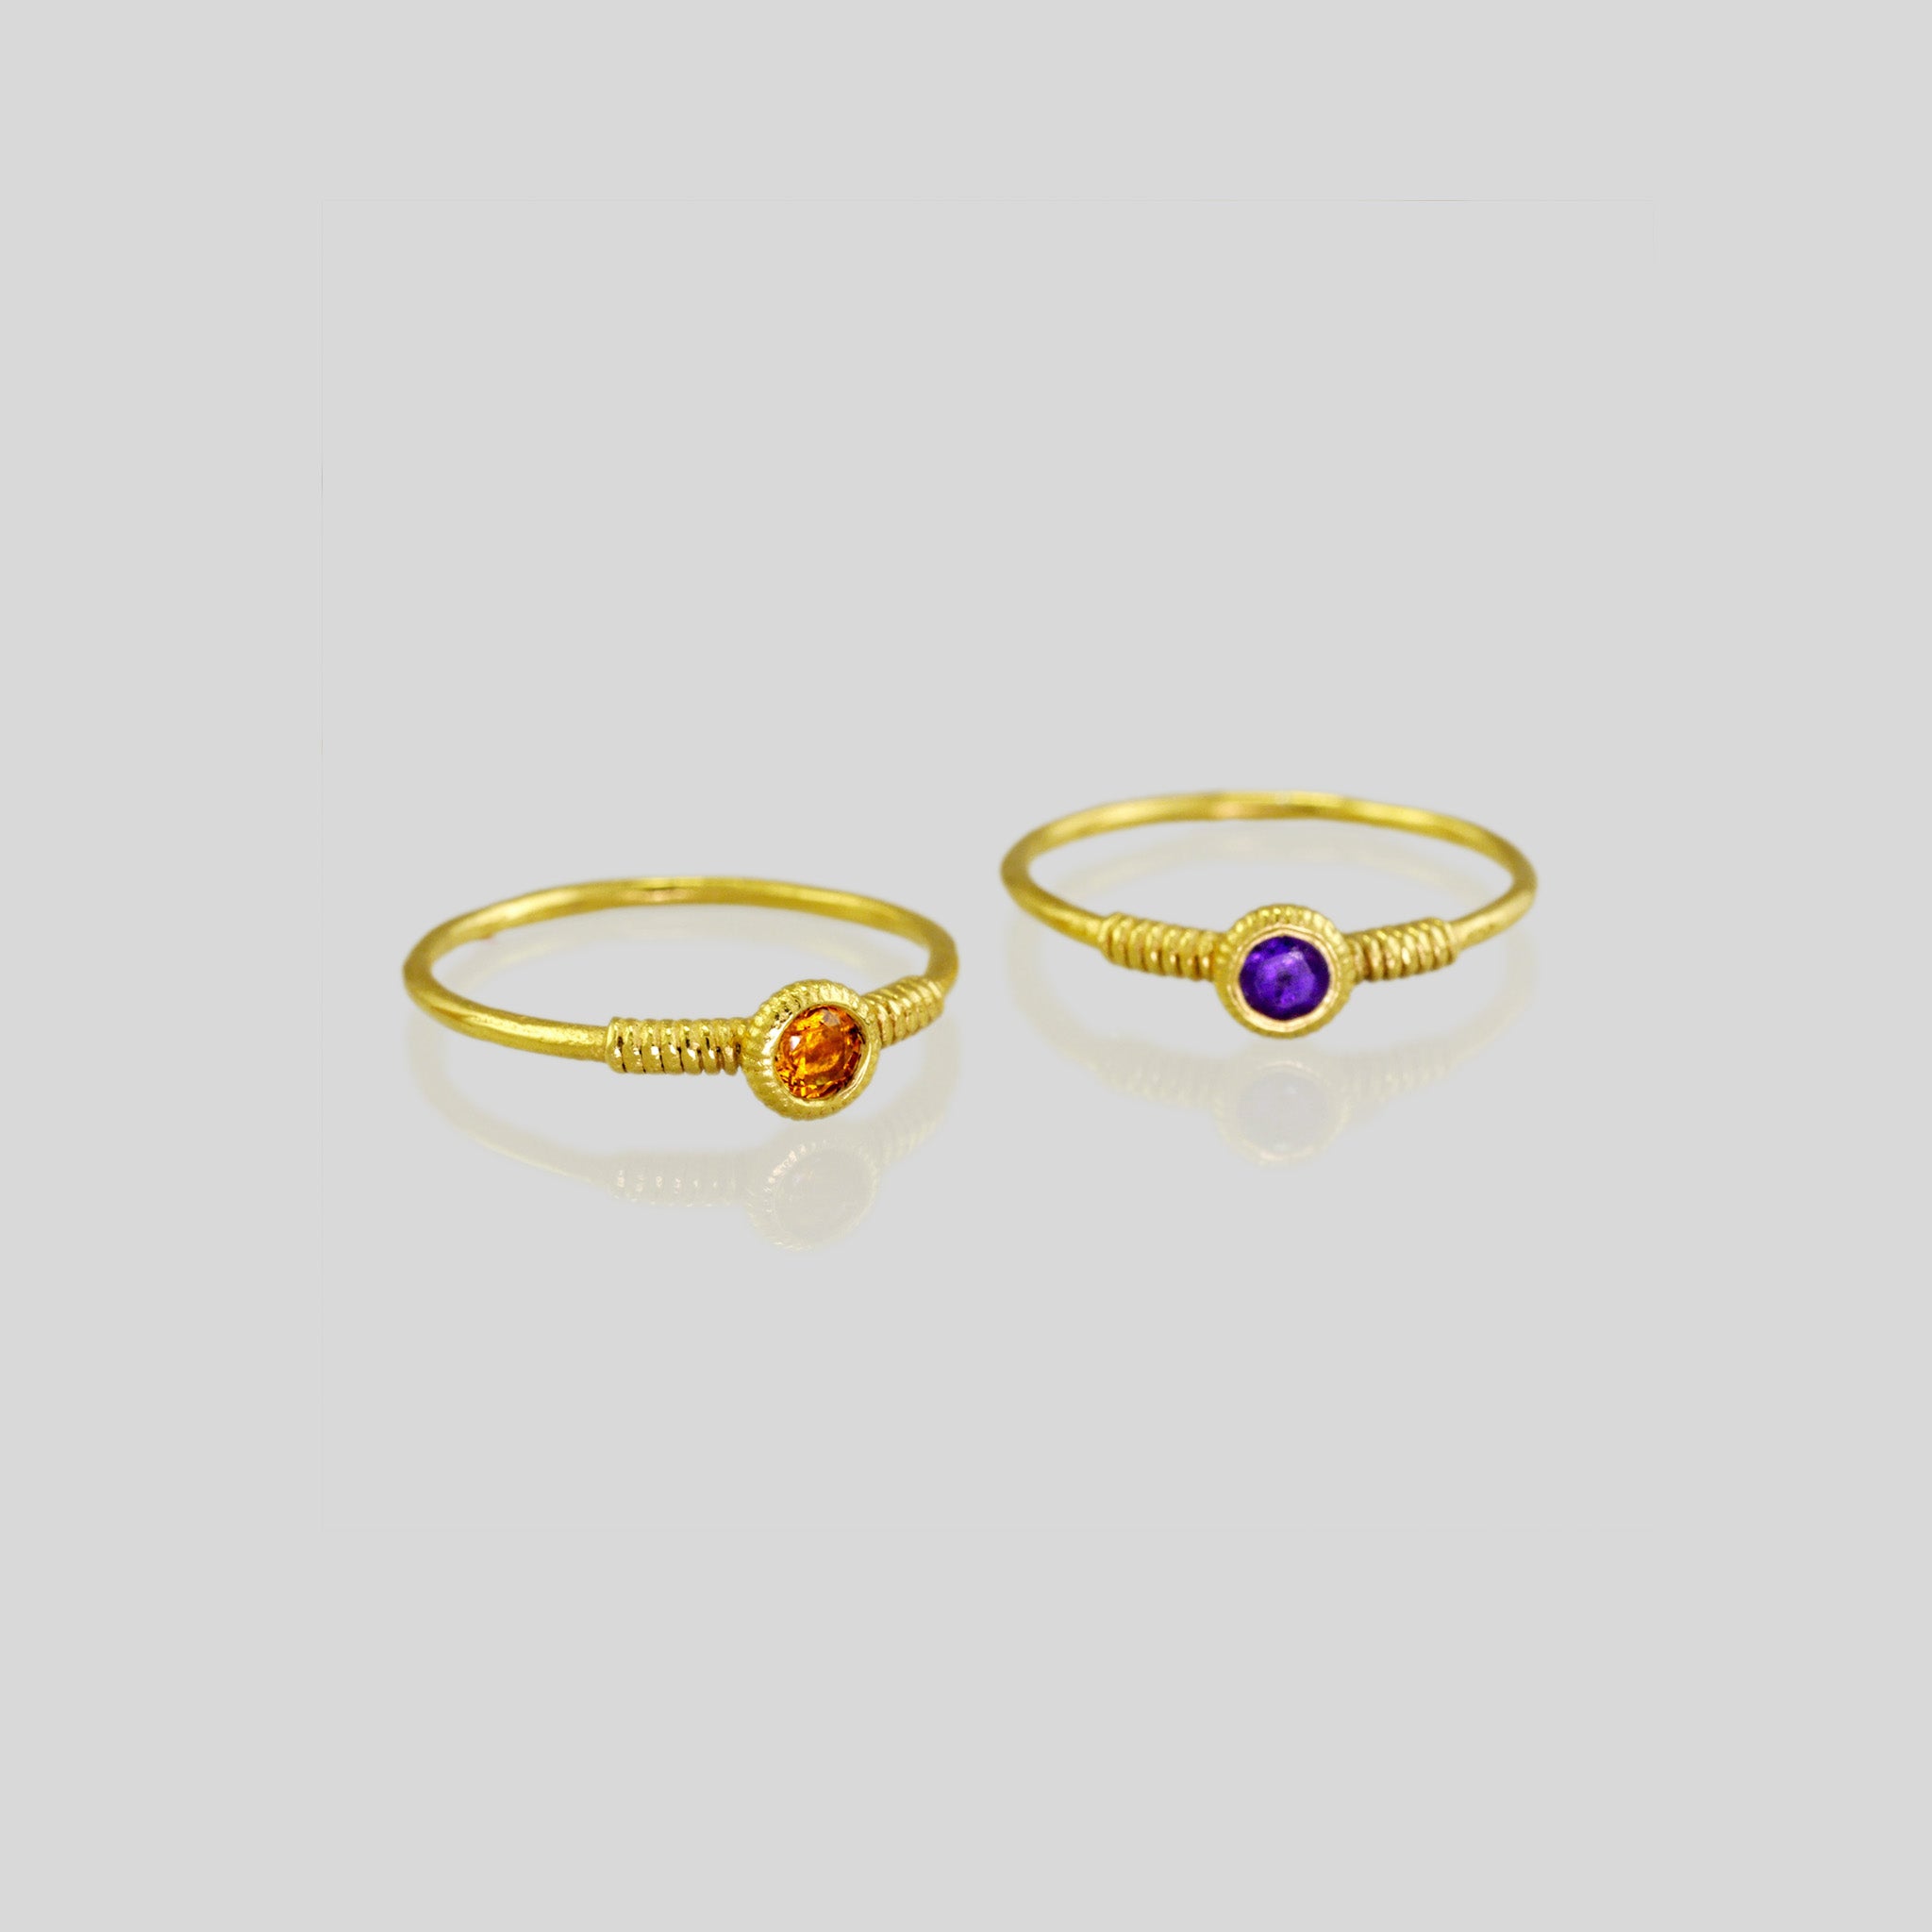 Delicate gold ring with coiled design and adorned with either Citrine or Amethyst gemstone. Poetically shaped and radiating elegance.